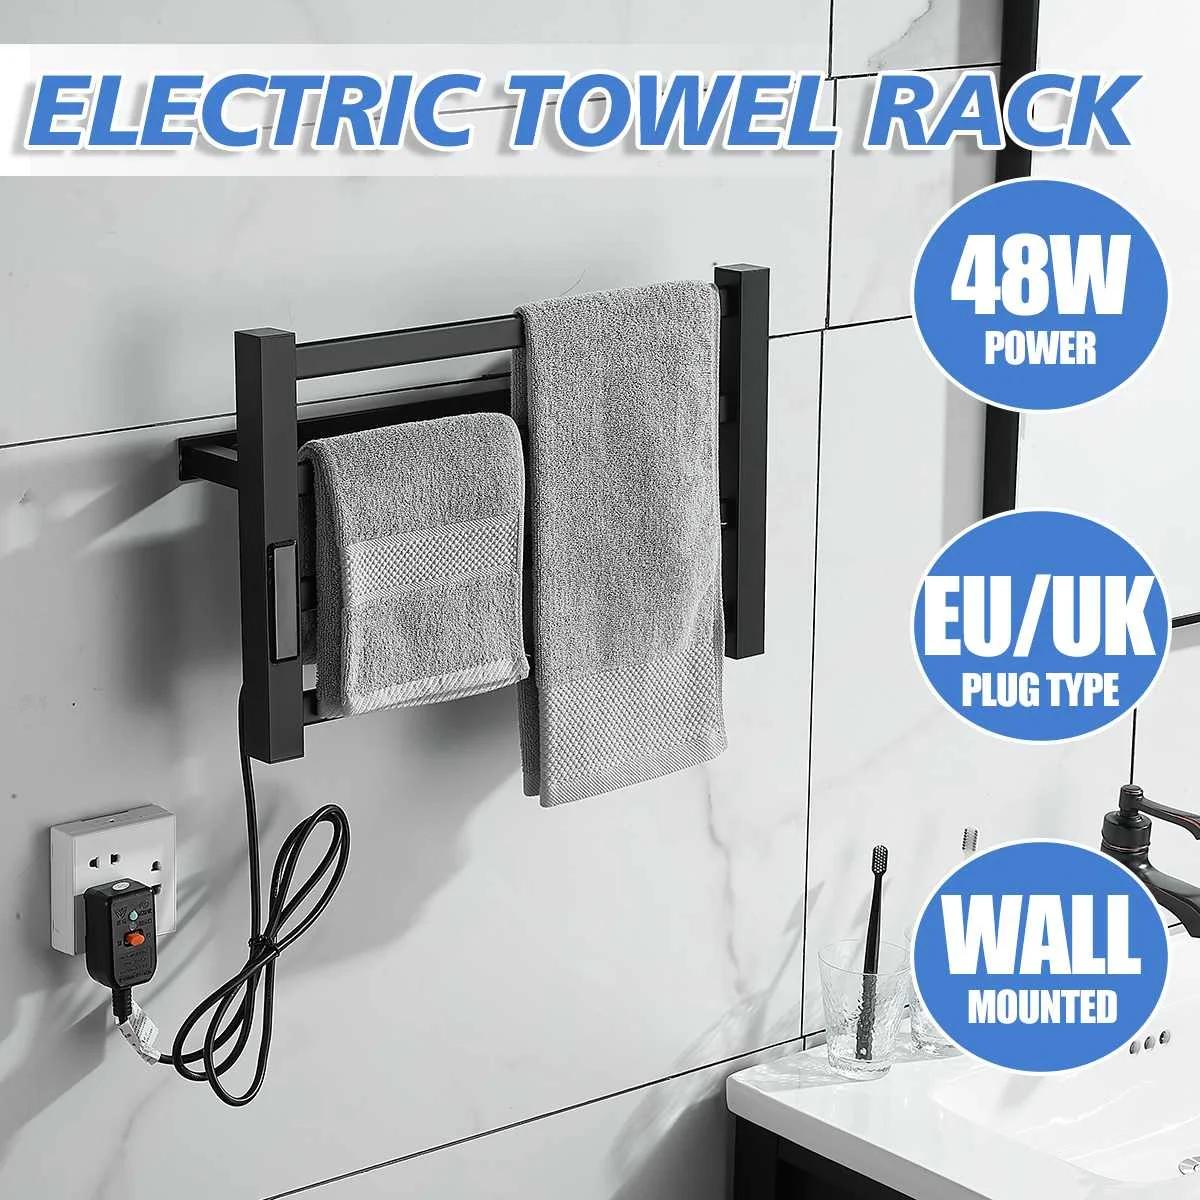 

New Bathroom Equipment Electric Towel Rack Stainless Steel Temperature &Time Control Smart Home Heated Towels Rail Towel Warmer